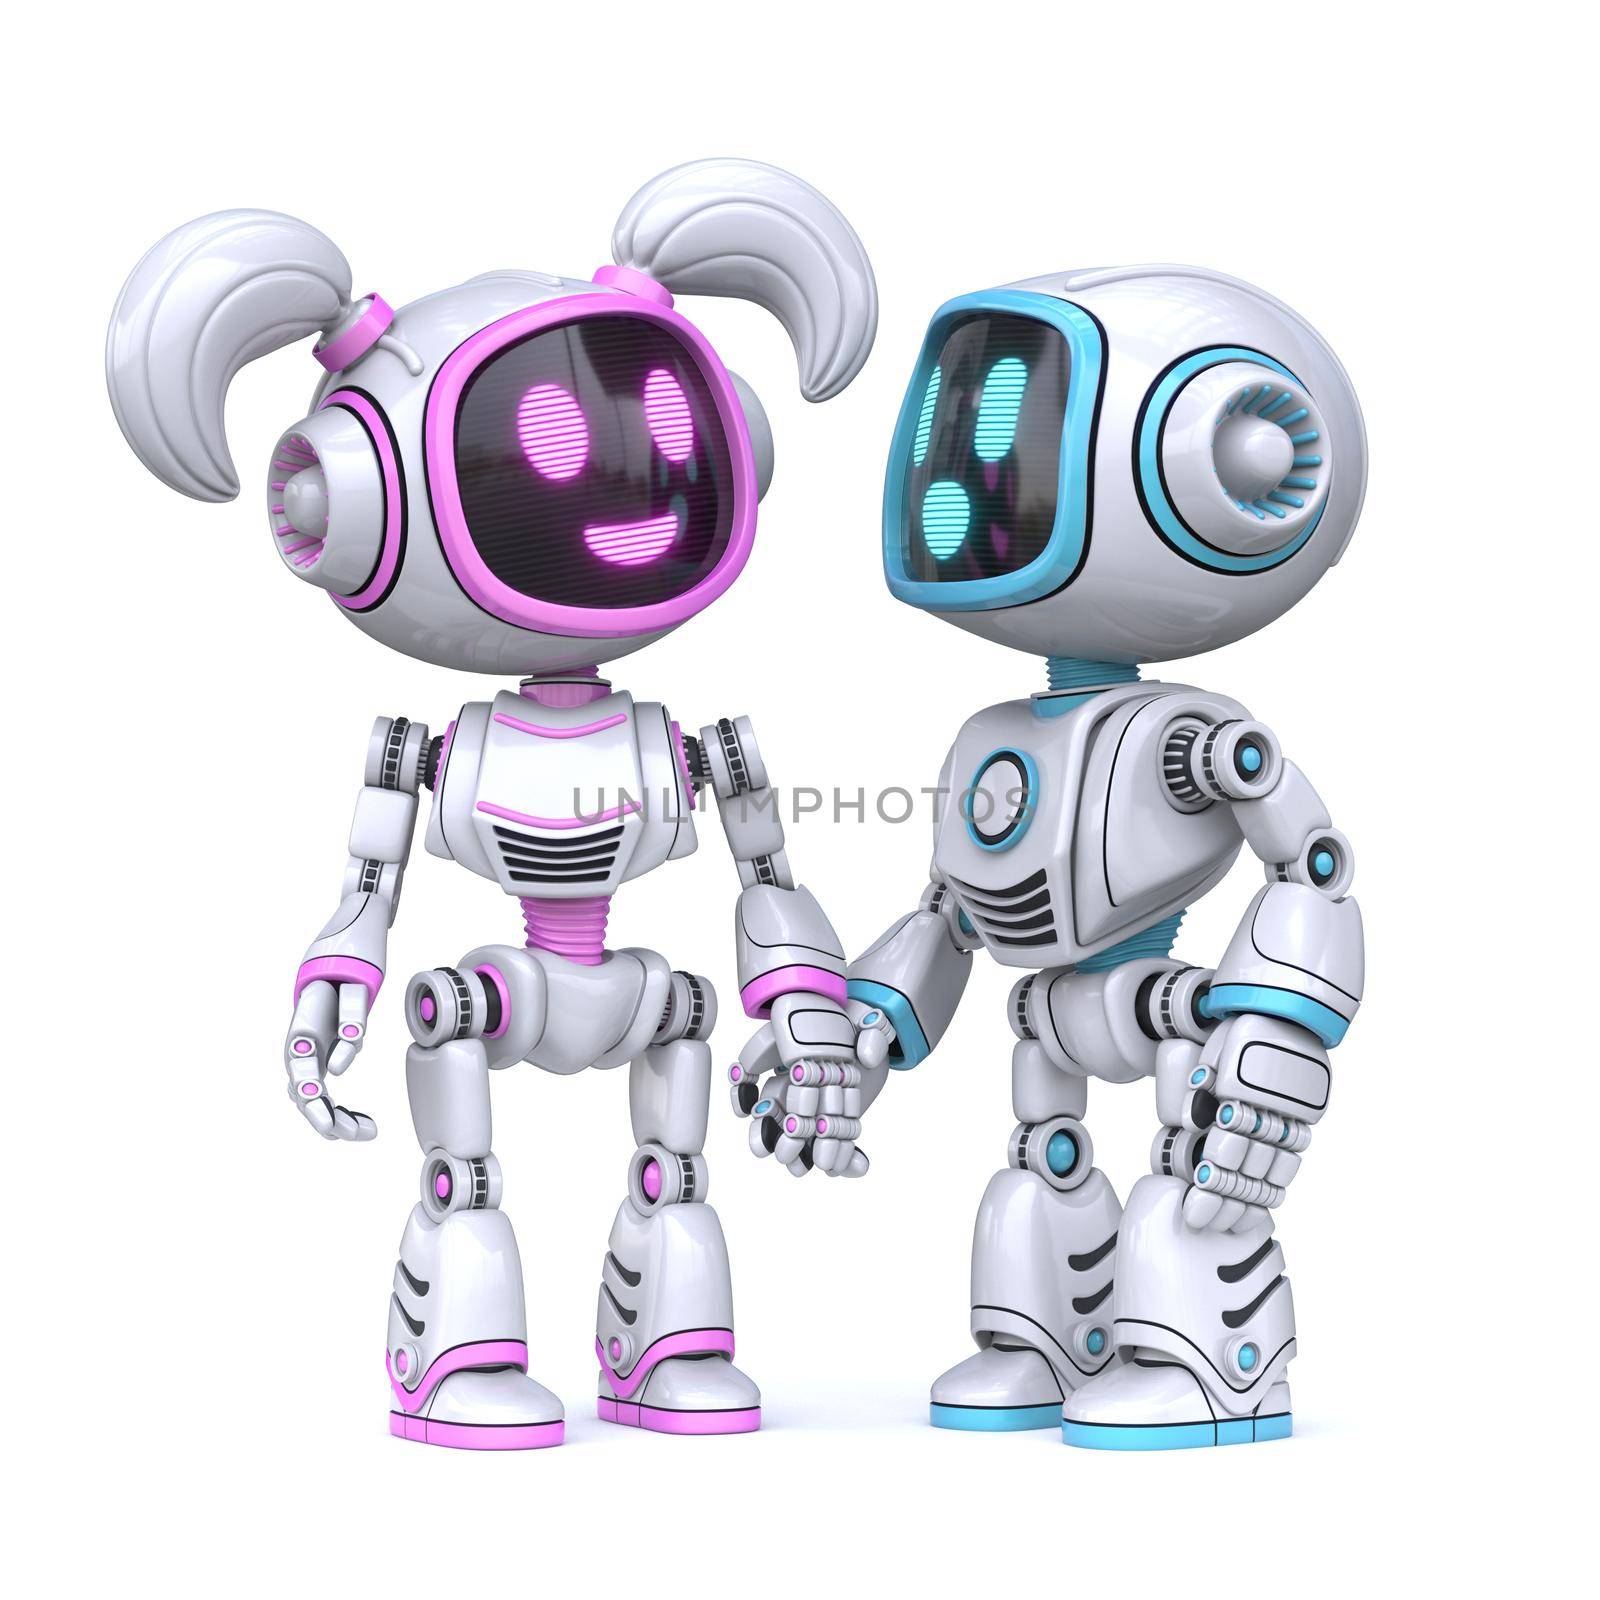 Cute pink girl and blue boy robots holding hands 3D rendering illustration isolated on white background